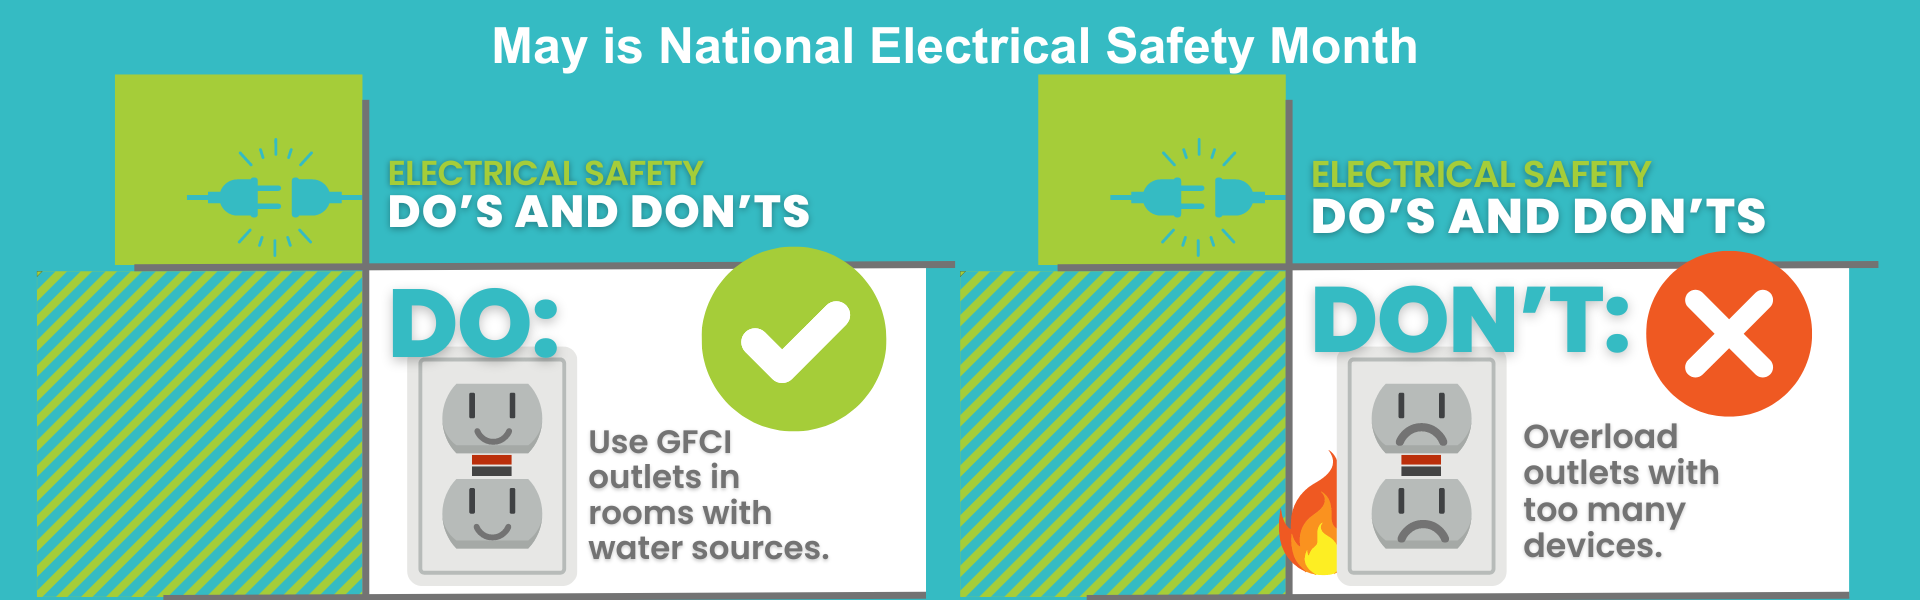 May is electrical safety month